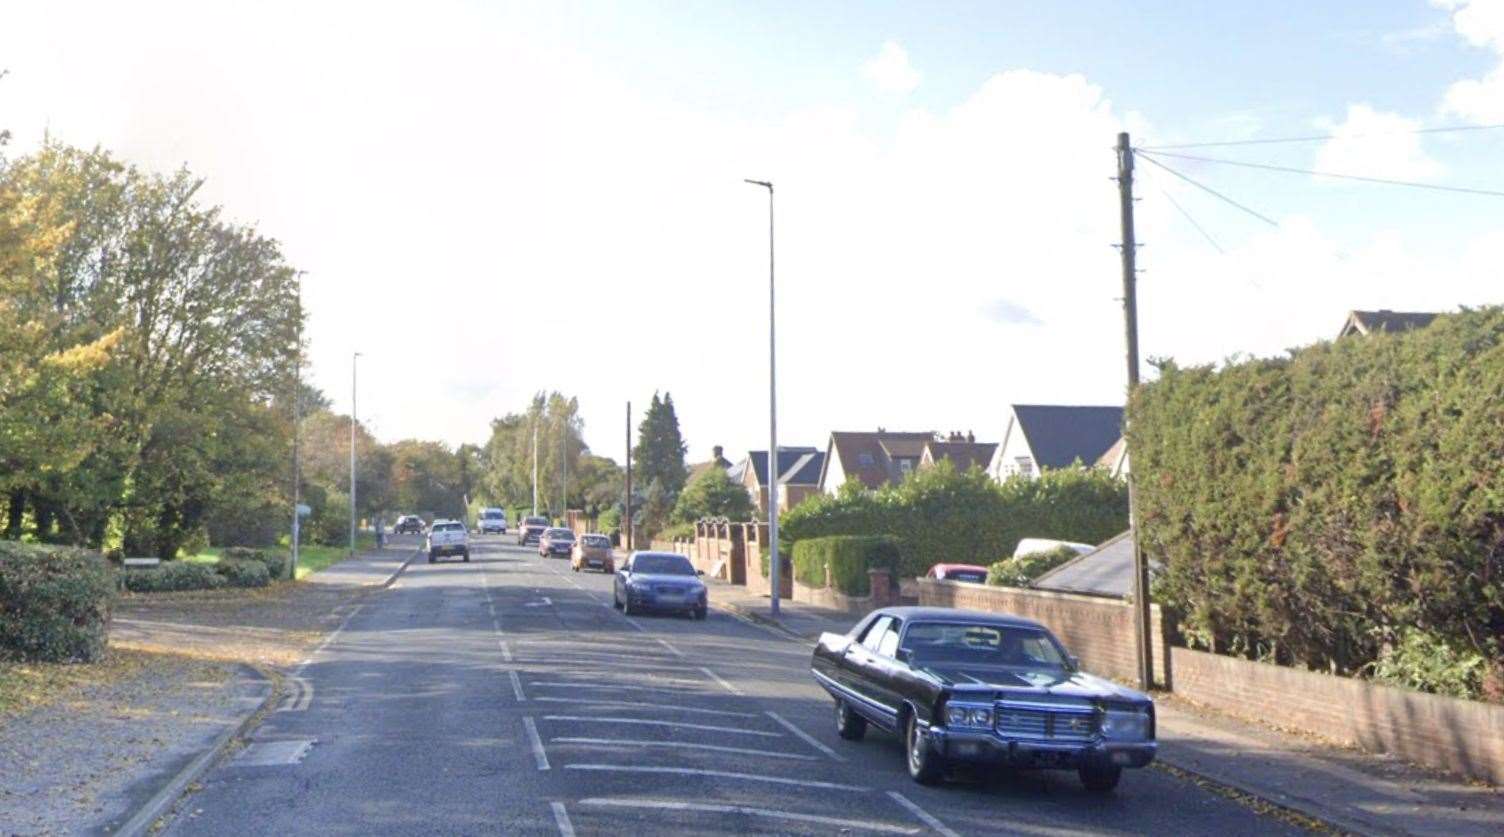 A230 Horsted Way in Chatham was closed after a woman and a girl were hit by a car. Picture: Google Maps